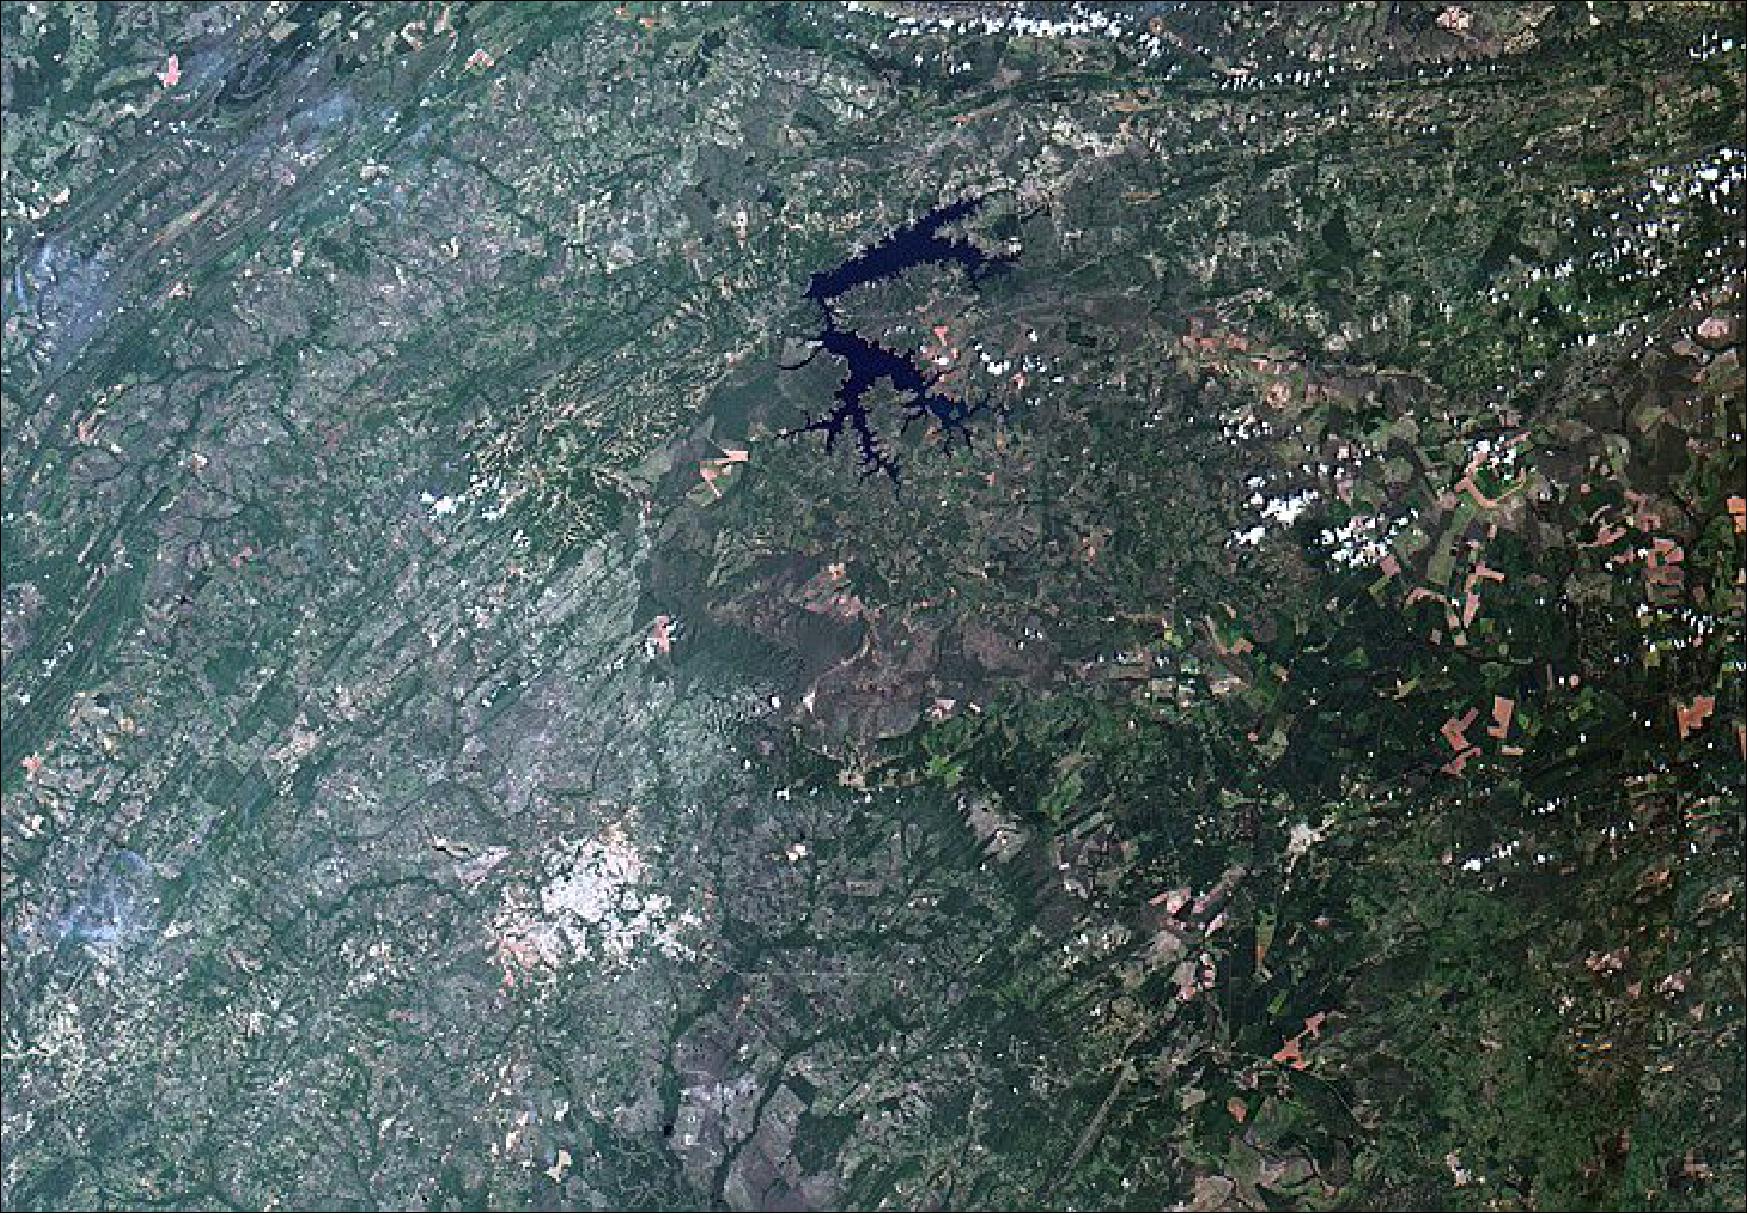 Figure 4: WFI image: Composition of real colors, 55 m spatial resolution, over an area of 330 km by 200 km. Cuiaba, the capital city of the Brazilian state of Mato Grosso, is located in the lower left (gray/white), while the Manso reservoir is visible in the top center (image credit: INPE)